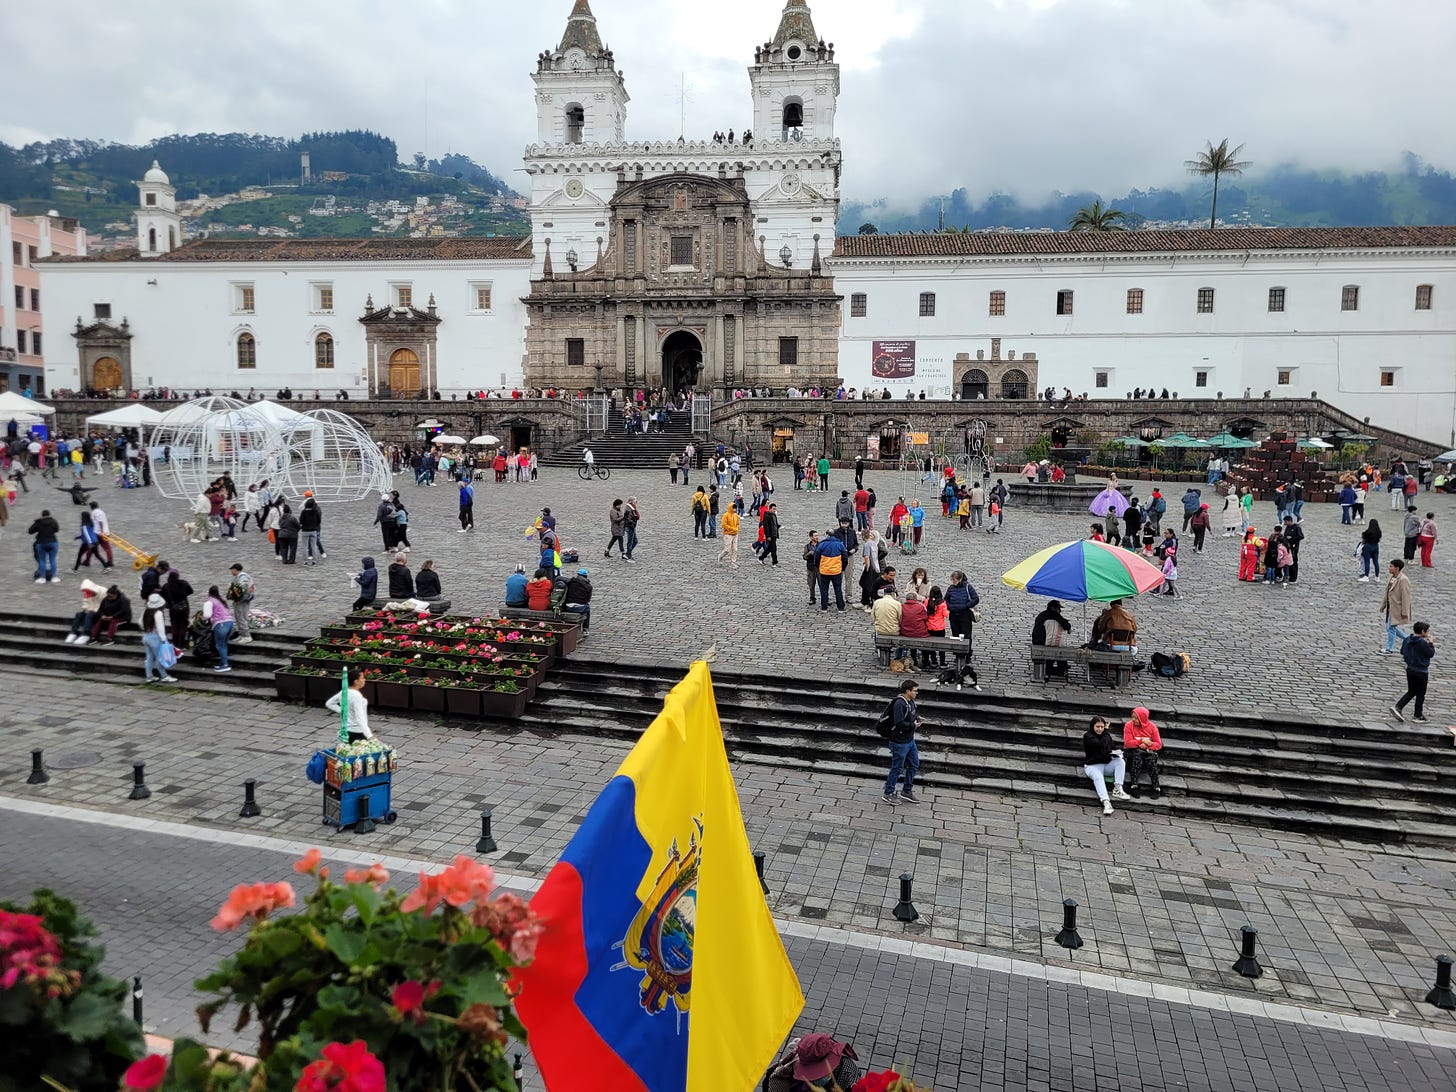 Sightseeing in the historic center of Quito, Ecuador